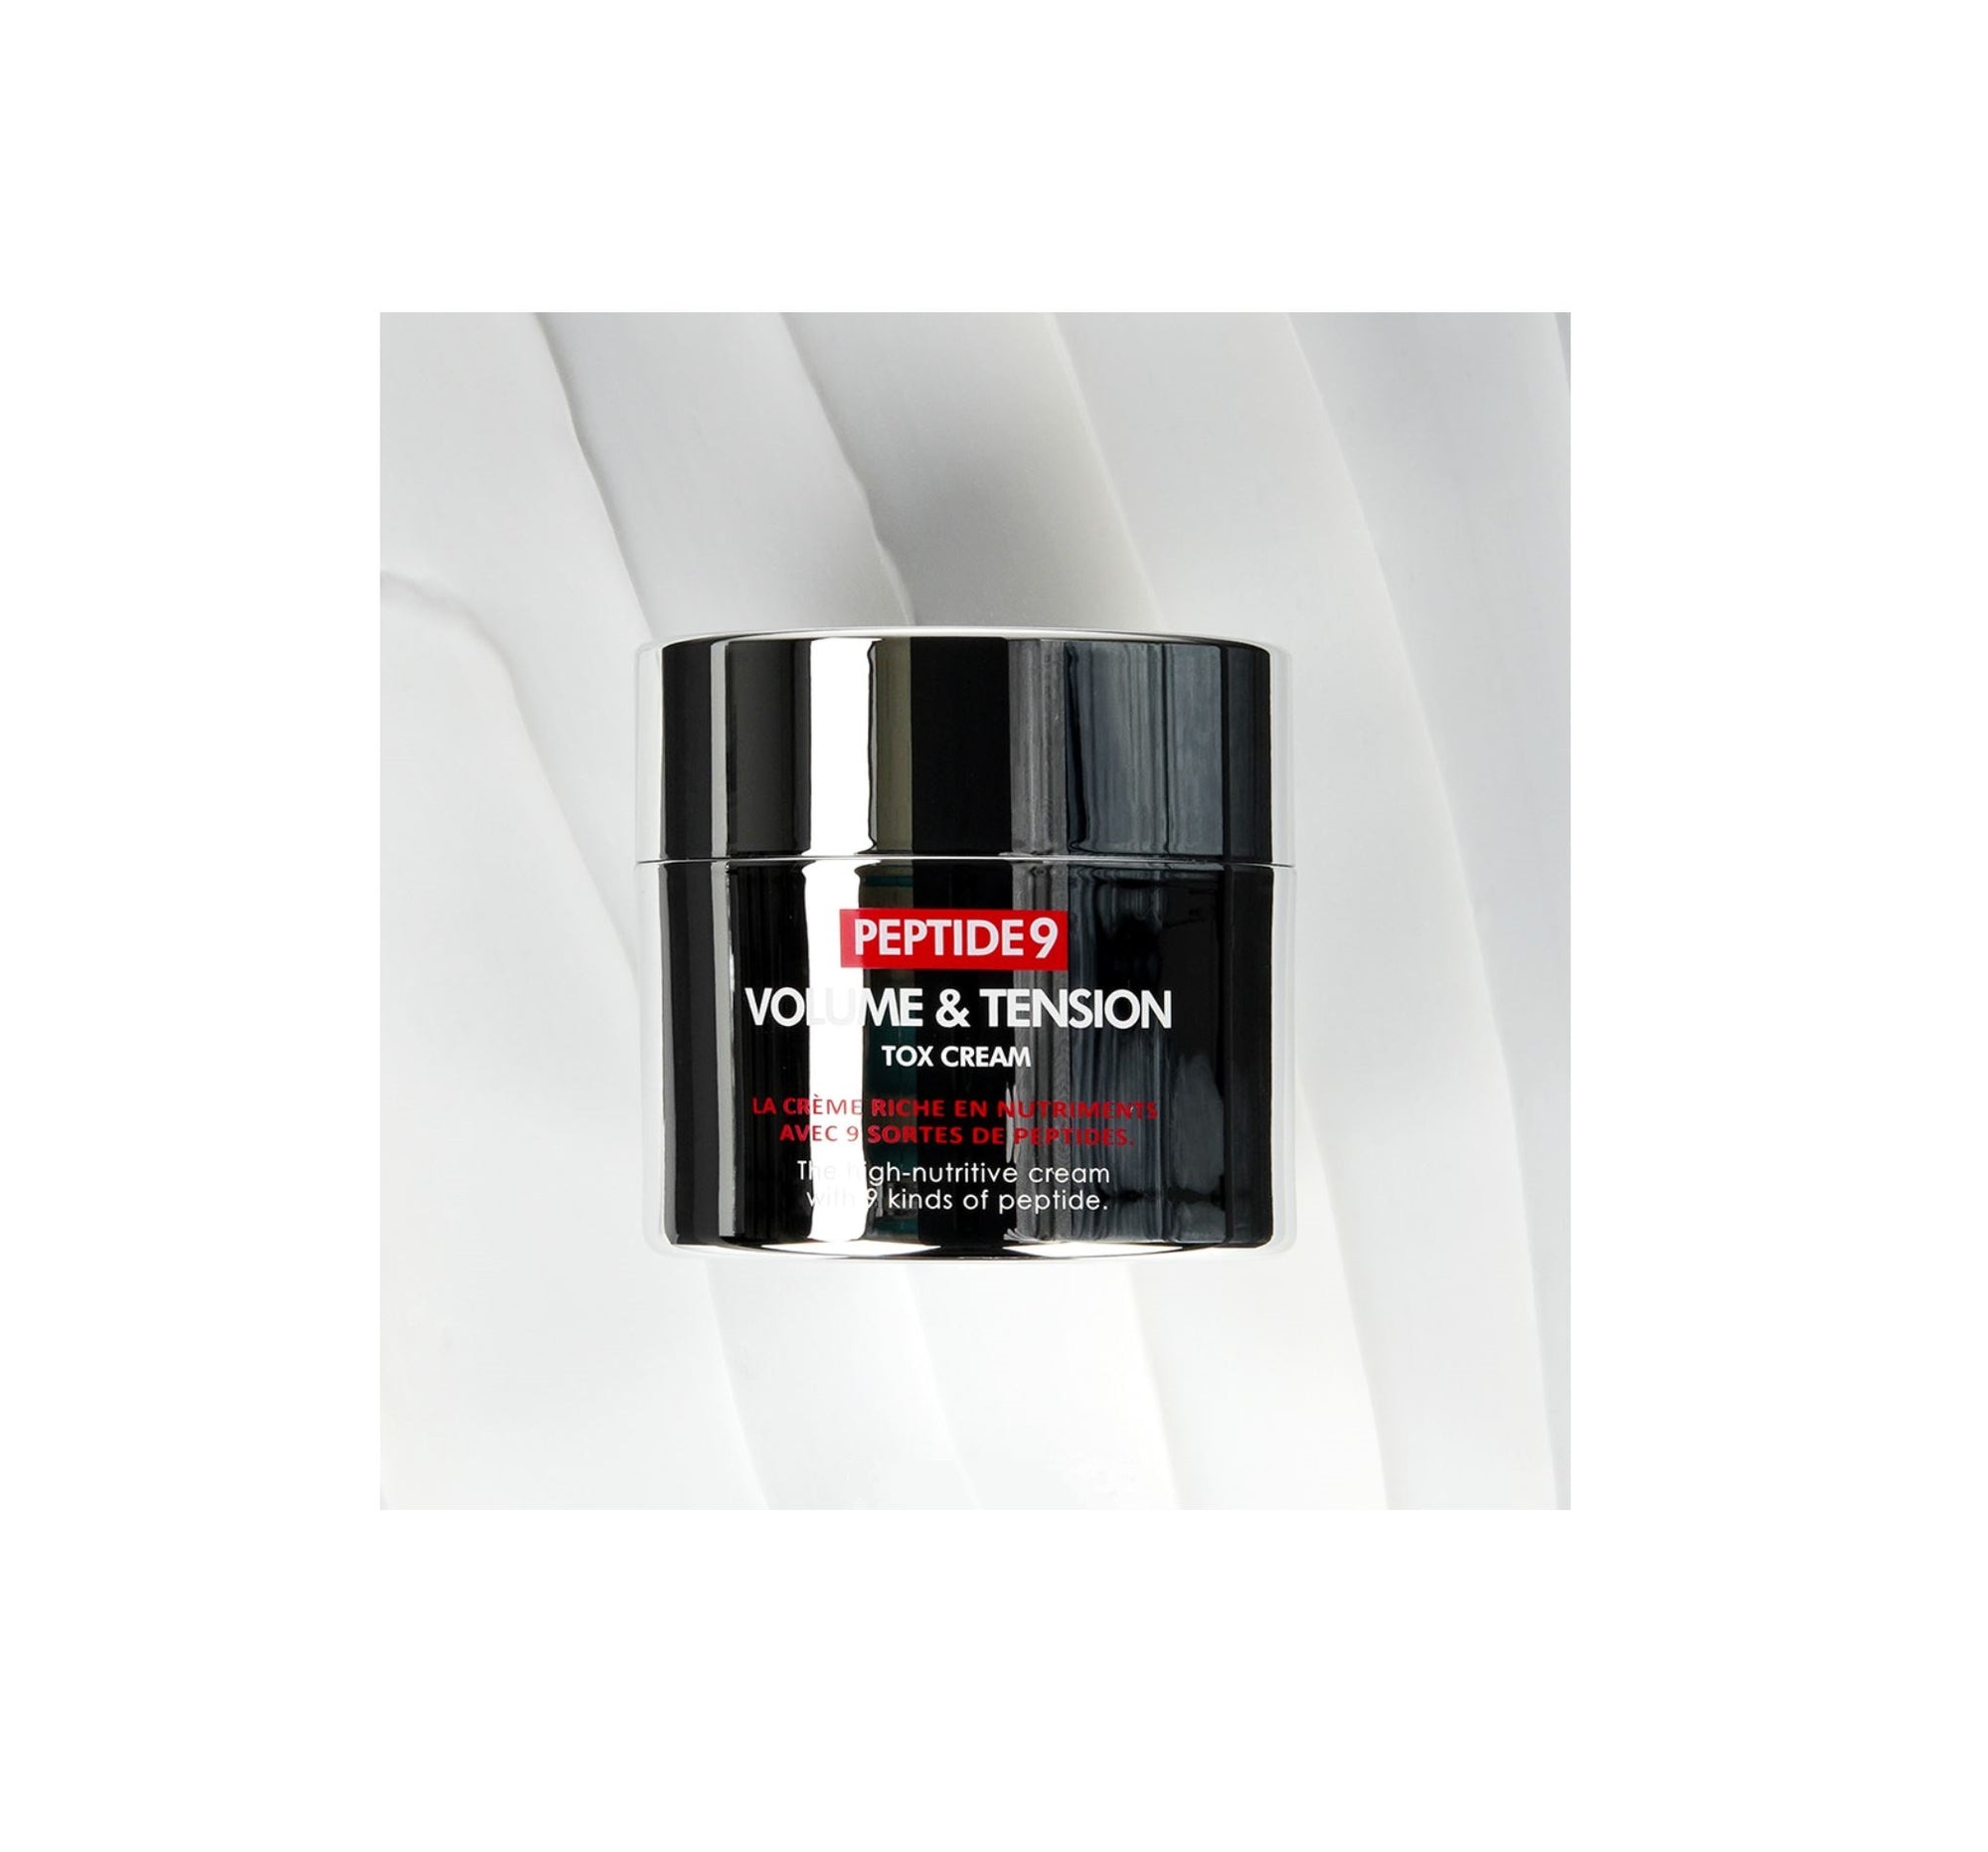 Peptide 9 Volume and Tension Tox Cream Pro (Renewal)50g